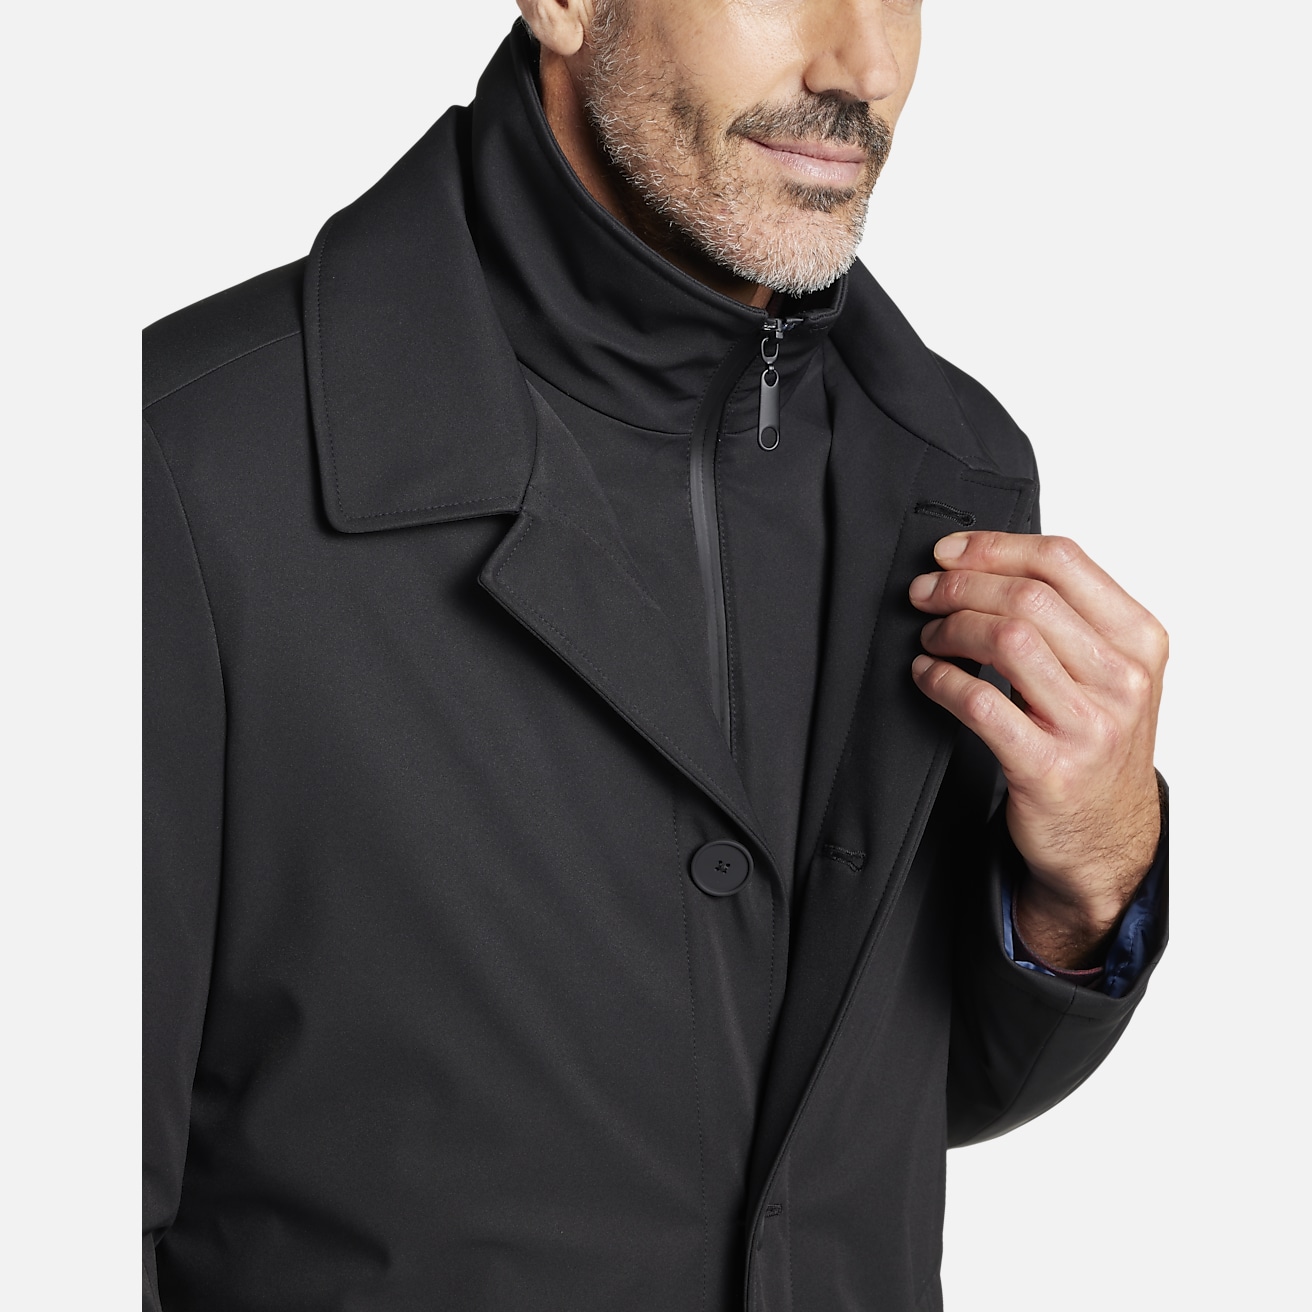 https://image.menswearhouse.com/is/image/TMW/TMW_71LV_02_CALVIN_KLEIN_RAINCOATS_BLACK_SOLID_ALT2?imPolicy=pdp-mob-2x